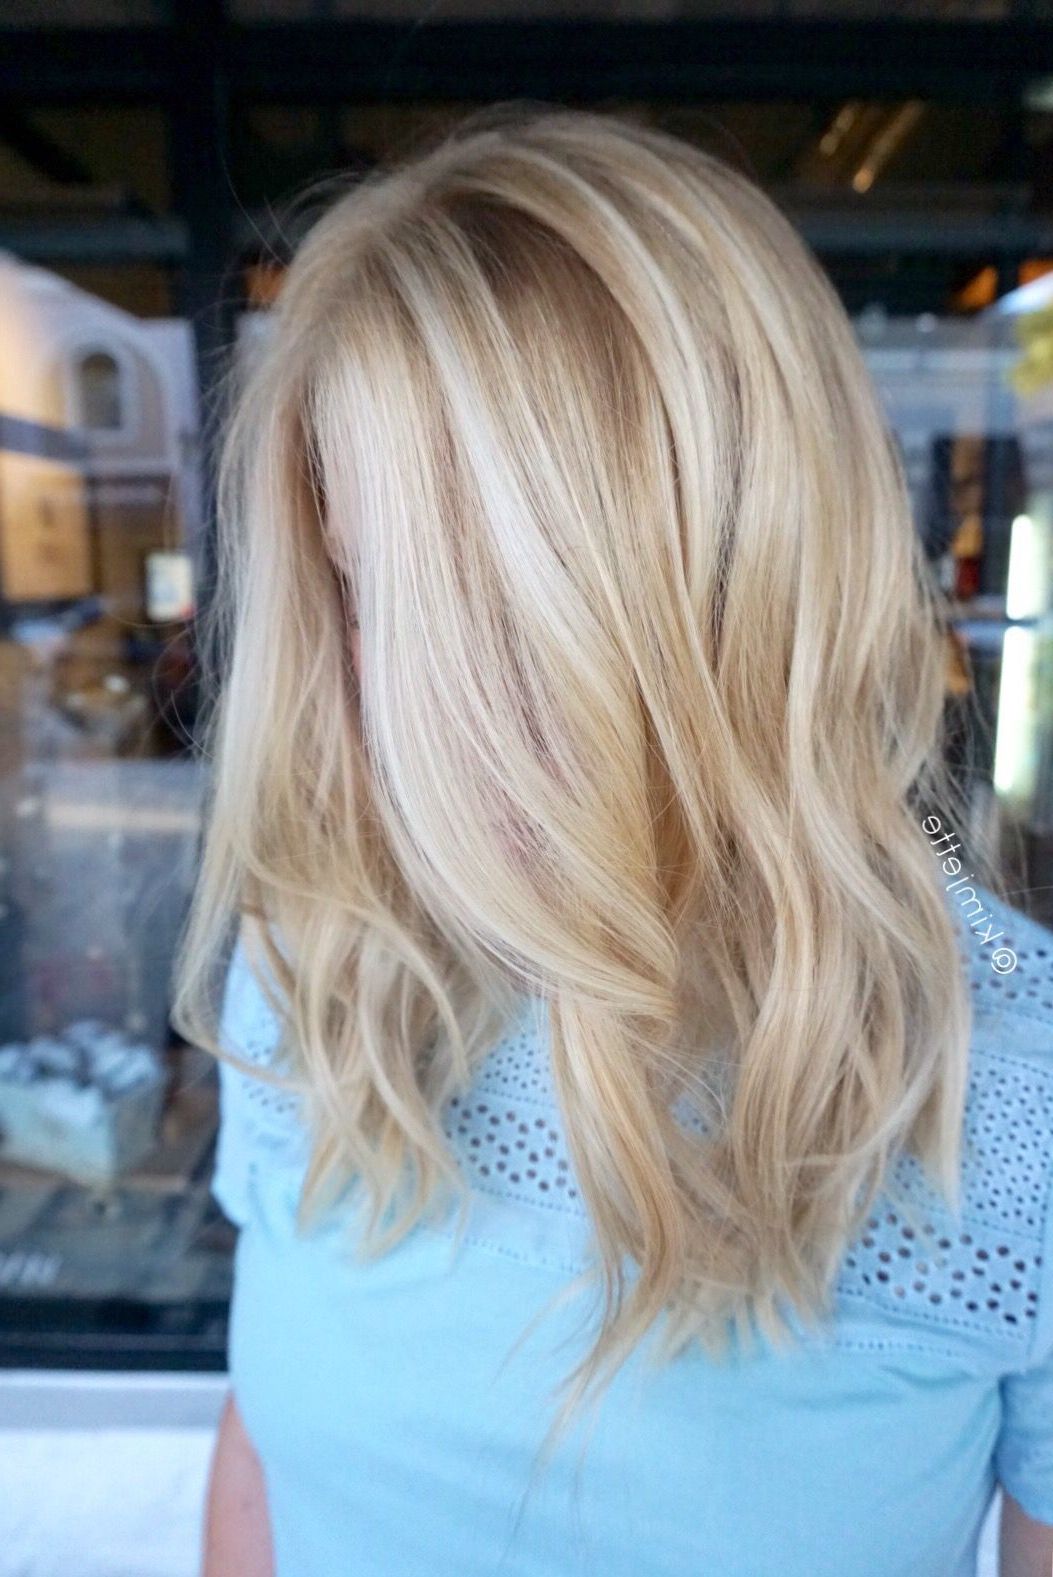 Color And Cut Http://niffler Elm.tumblr/post/157400903821/short With Regard To Angelic Blonde Balayage Bob Hairstyles With Curls (Photo 4 of 25)